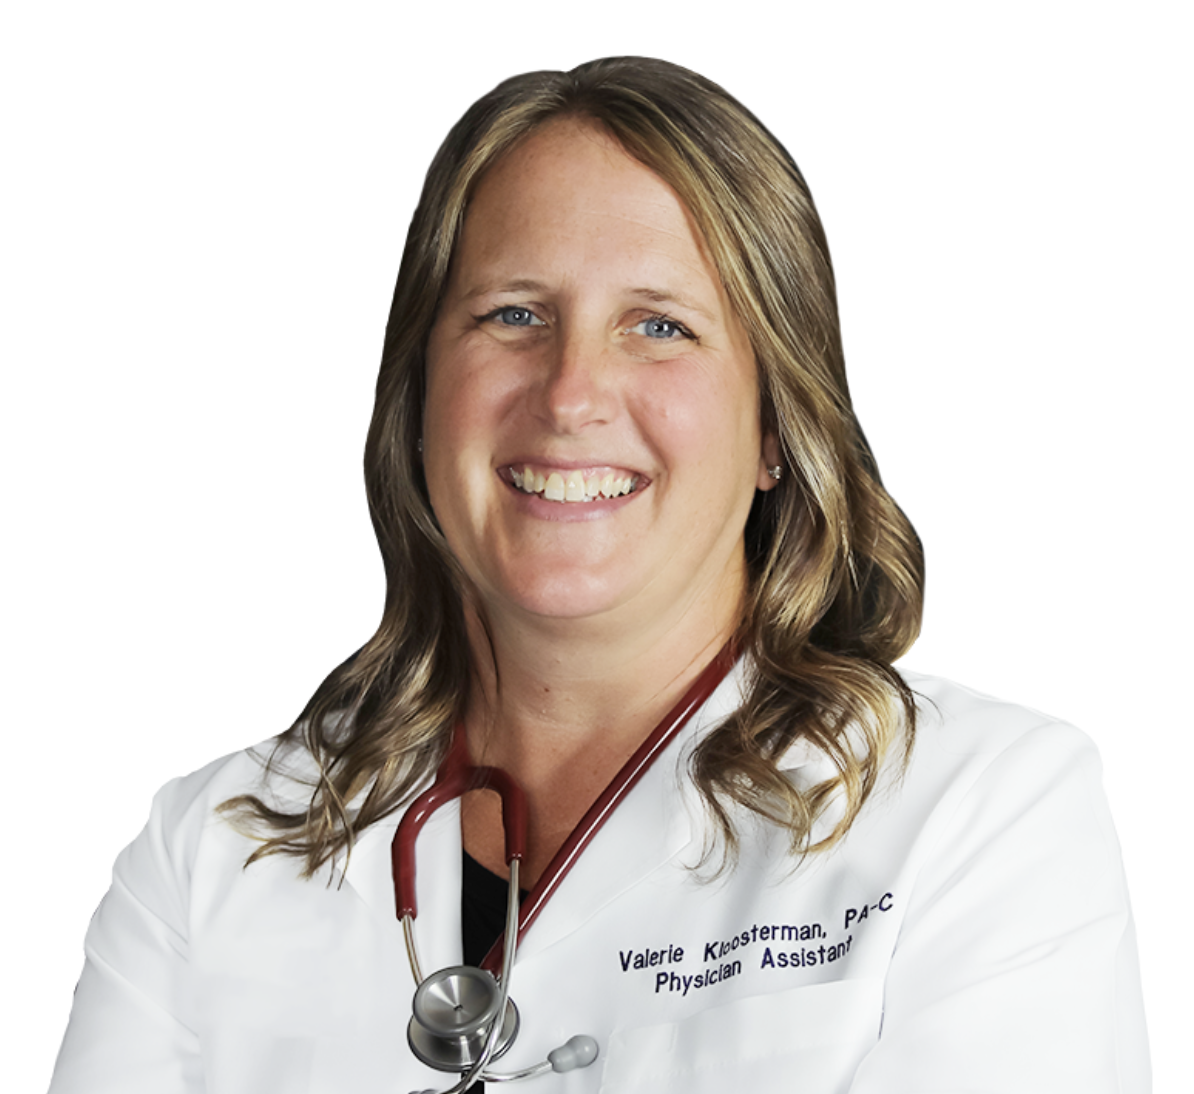 Valerie Kloosterman, a physician assistant